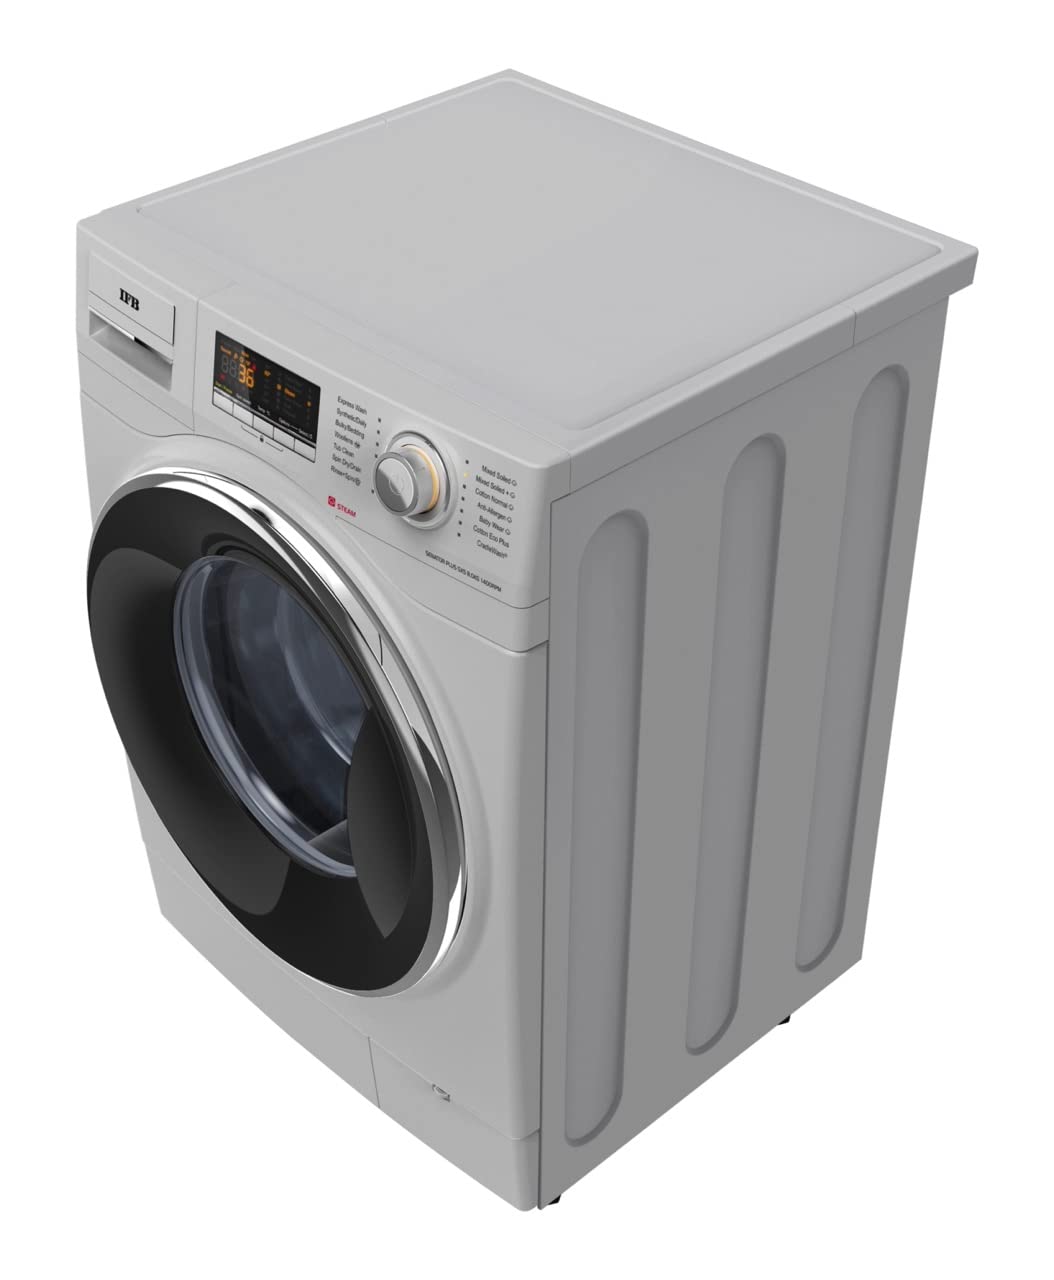 IFB 8 Kg 5 Star Fully-Automatic Front Loading Washing Machine with Power Steam (Senator plus SXS 8014)